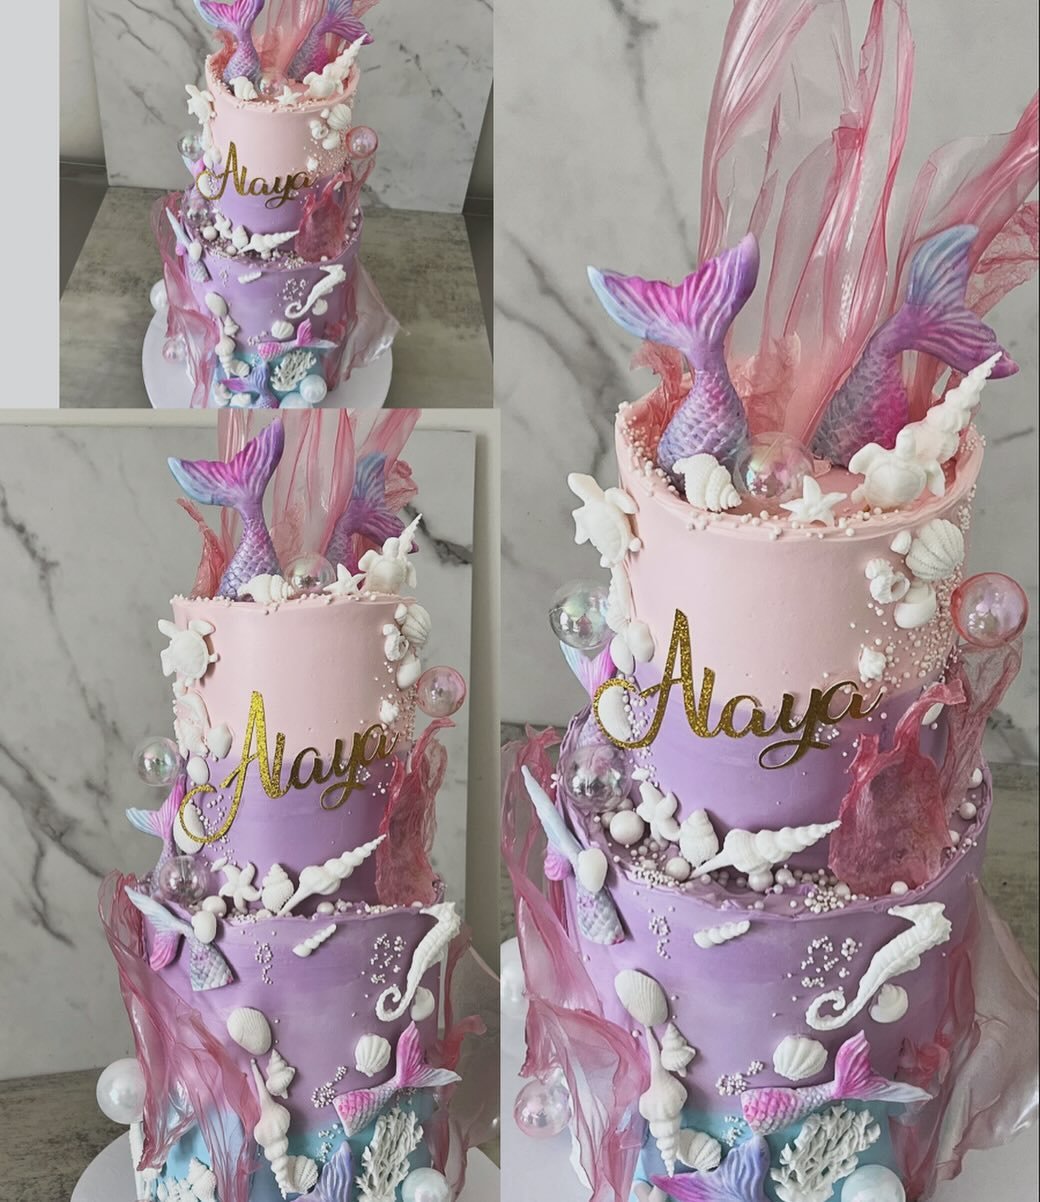 Happy Thursday!! 

One of my work from last weekend. Hope you like it. 

Book now for your upcoming events @ www.mavisbakes.com or email me at Mavis.bakes2024@gmail.com. 

Thank you all for your support. Enjoy your week!!
#mavis_bakes #mermaid #merma